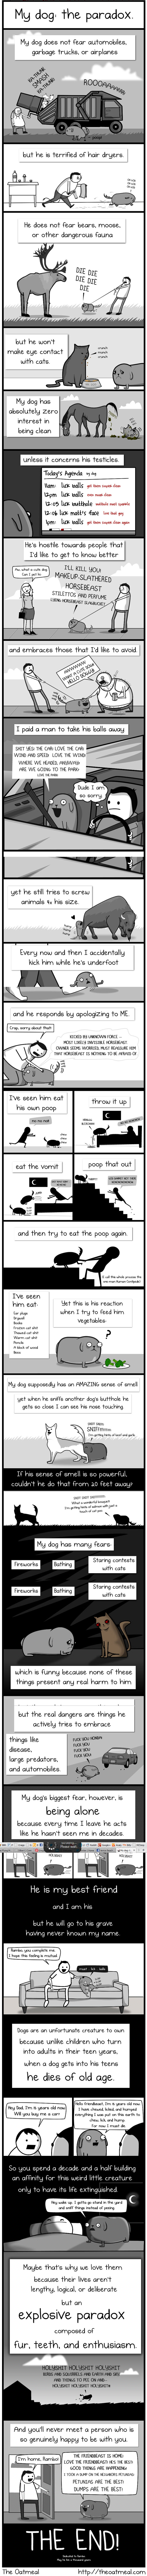 My dog: the paradox - The Oatmeal